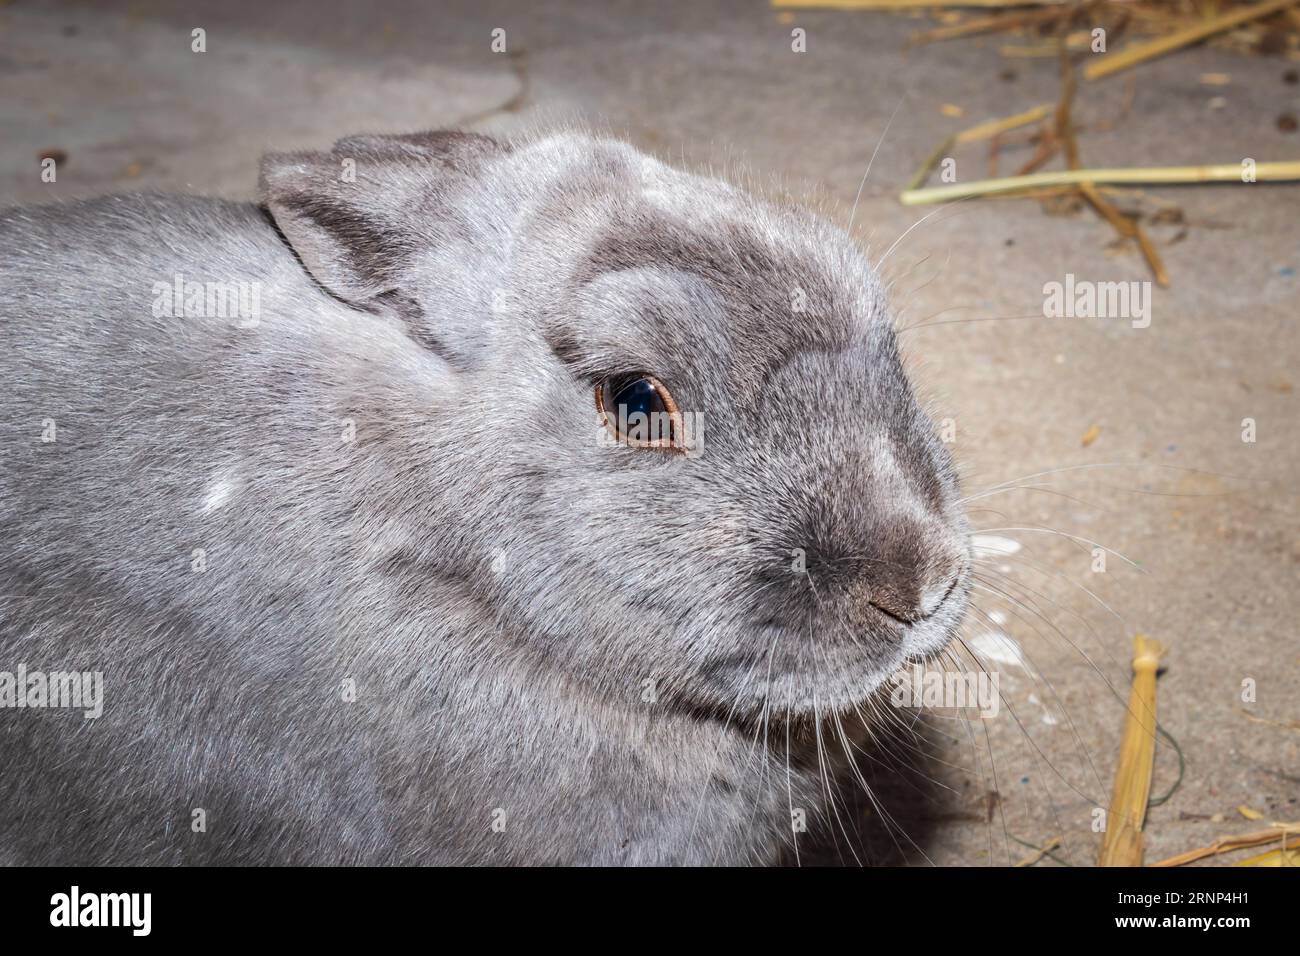 Cute domestic family pet rabbit, Cape Town, South Africa Stock Photo